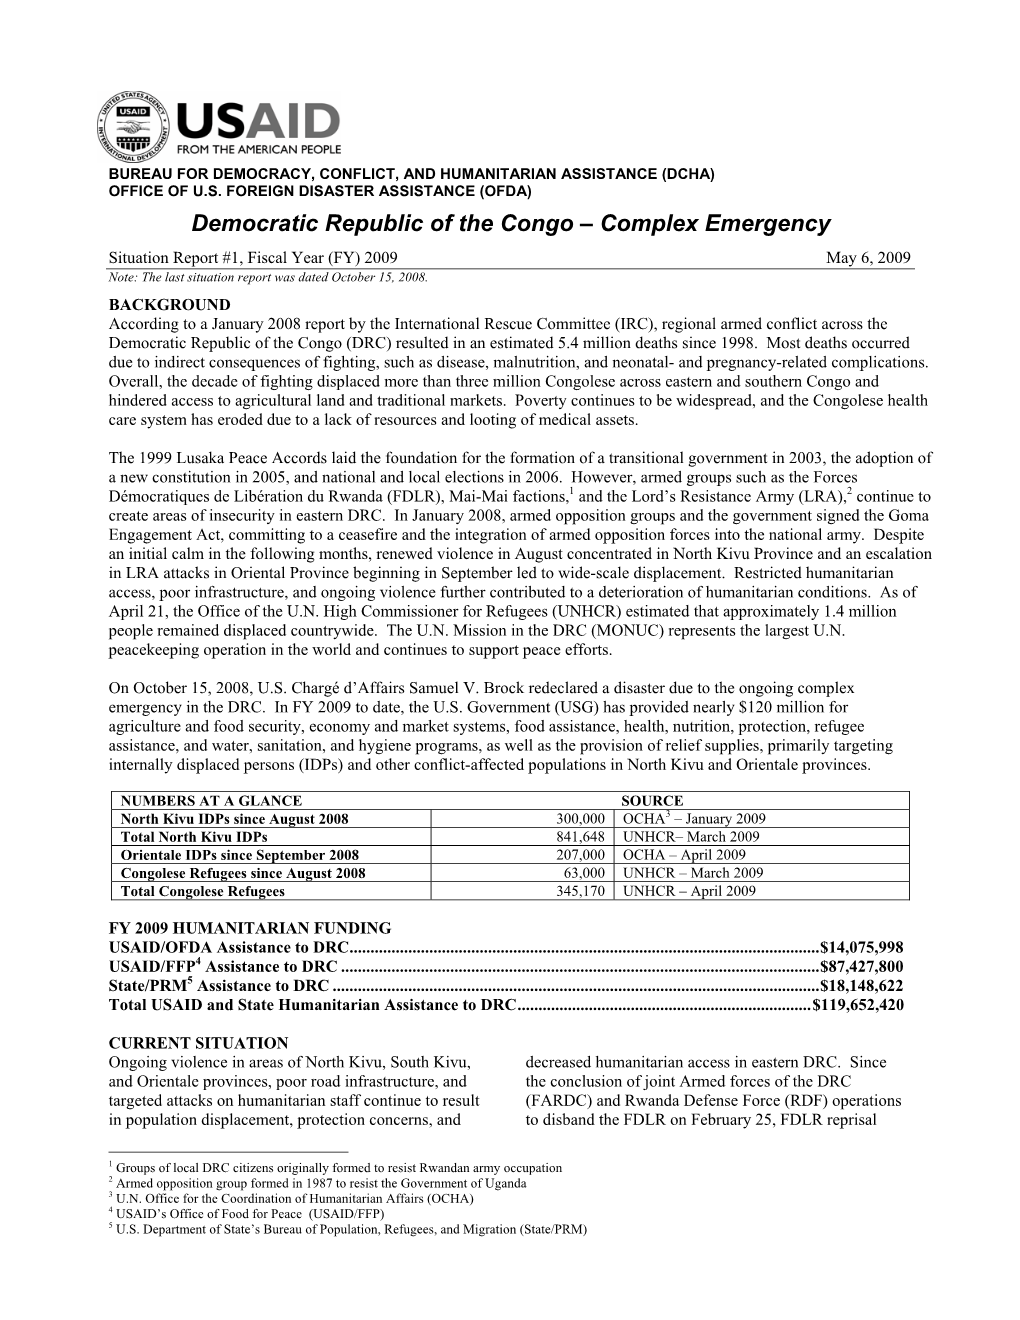 USAID/OFDA DRC Complex Emergency Situation Report #1